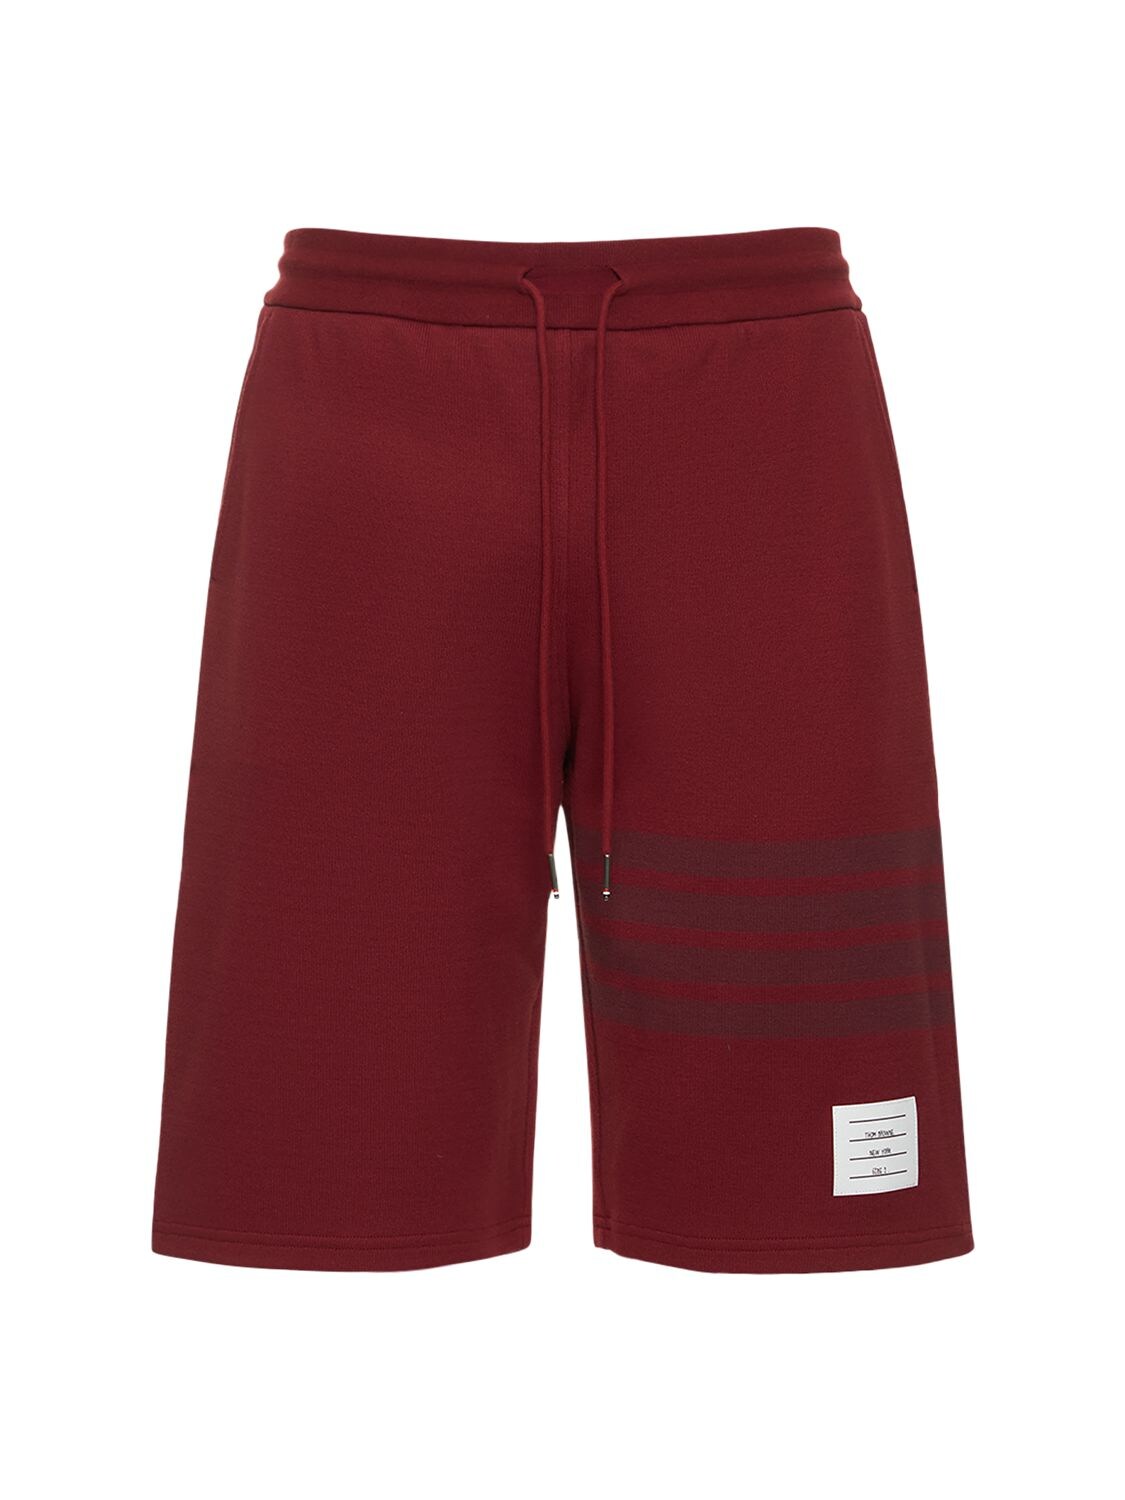 THOM BROWNE COTTON JERSEY SHORTS